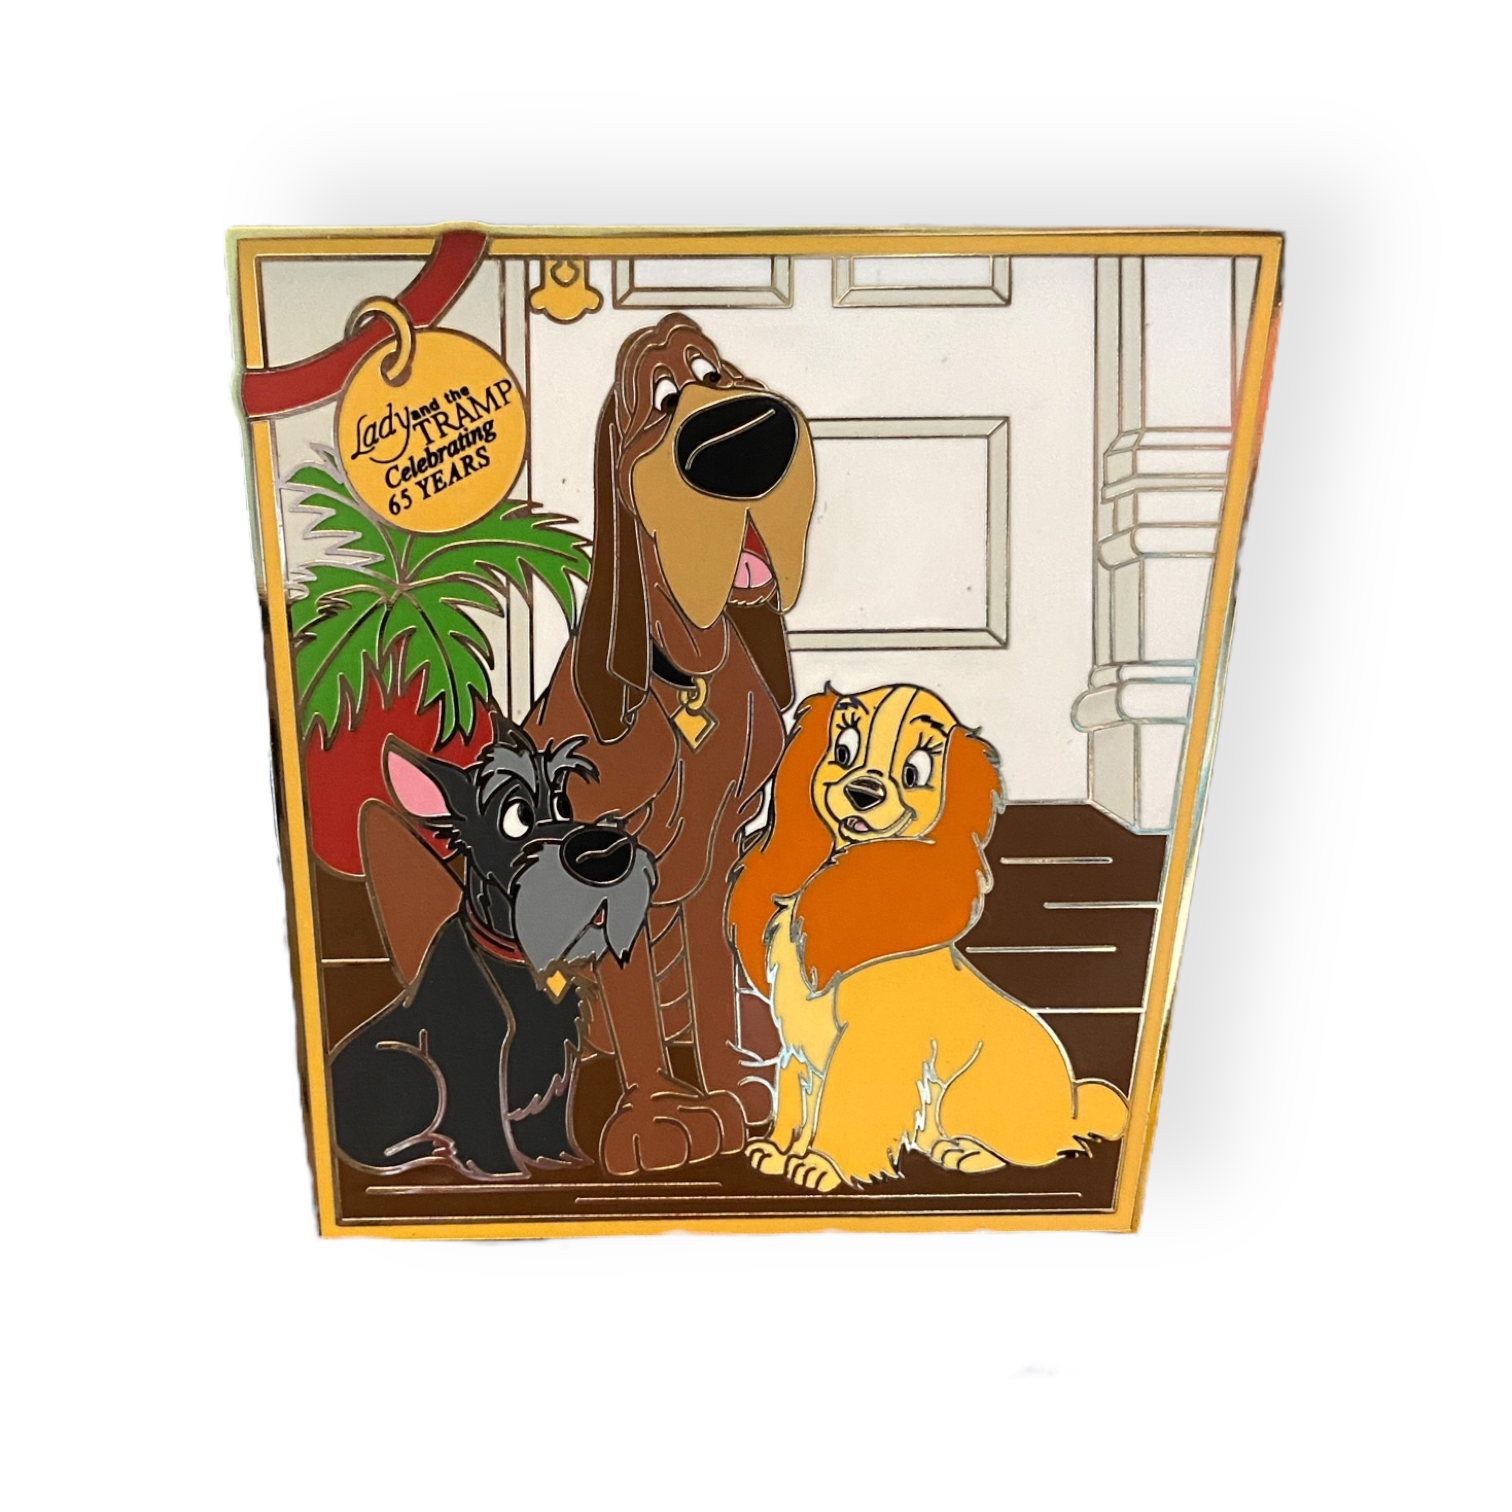 65th Anniversary Lady and The Tramp Box Pin Set